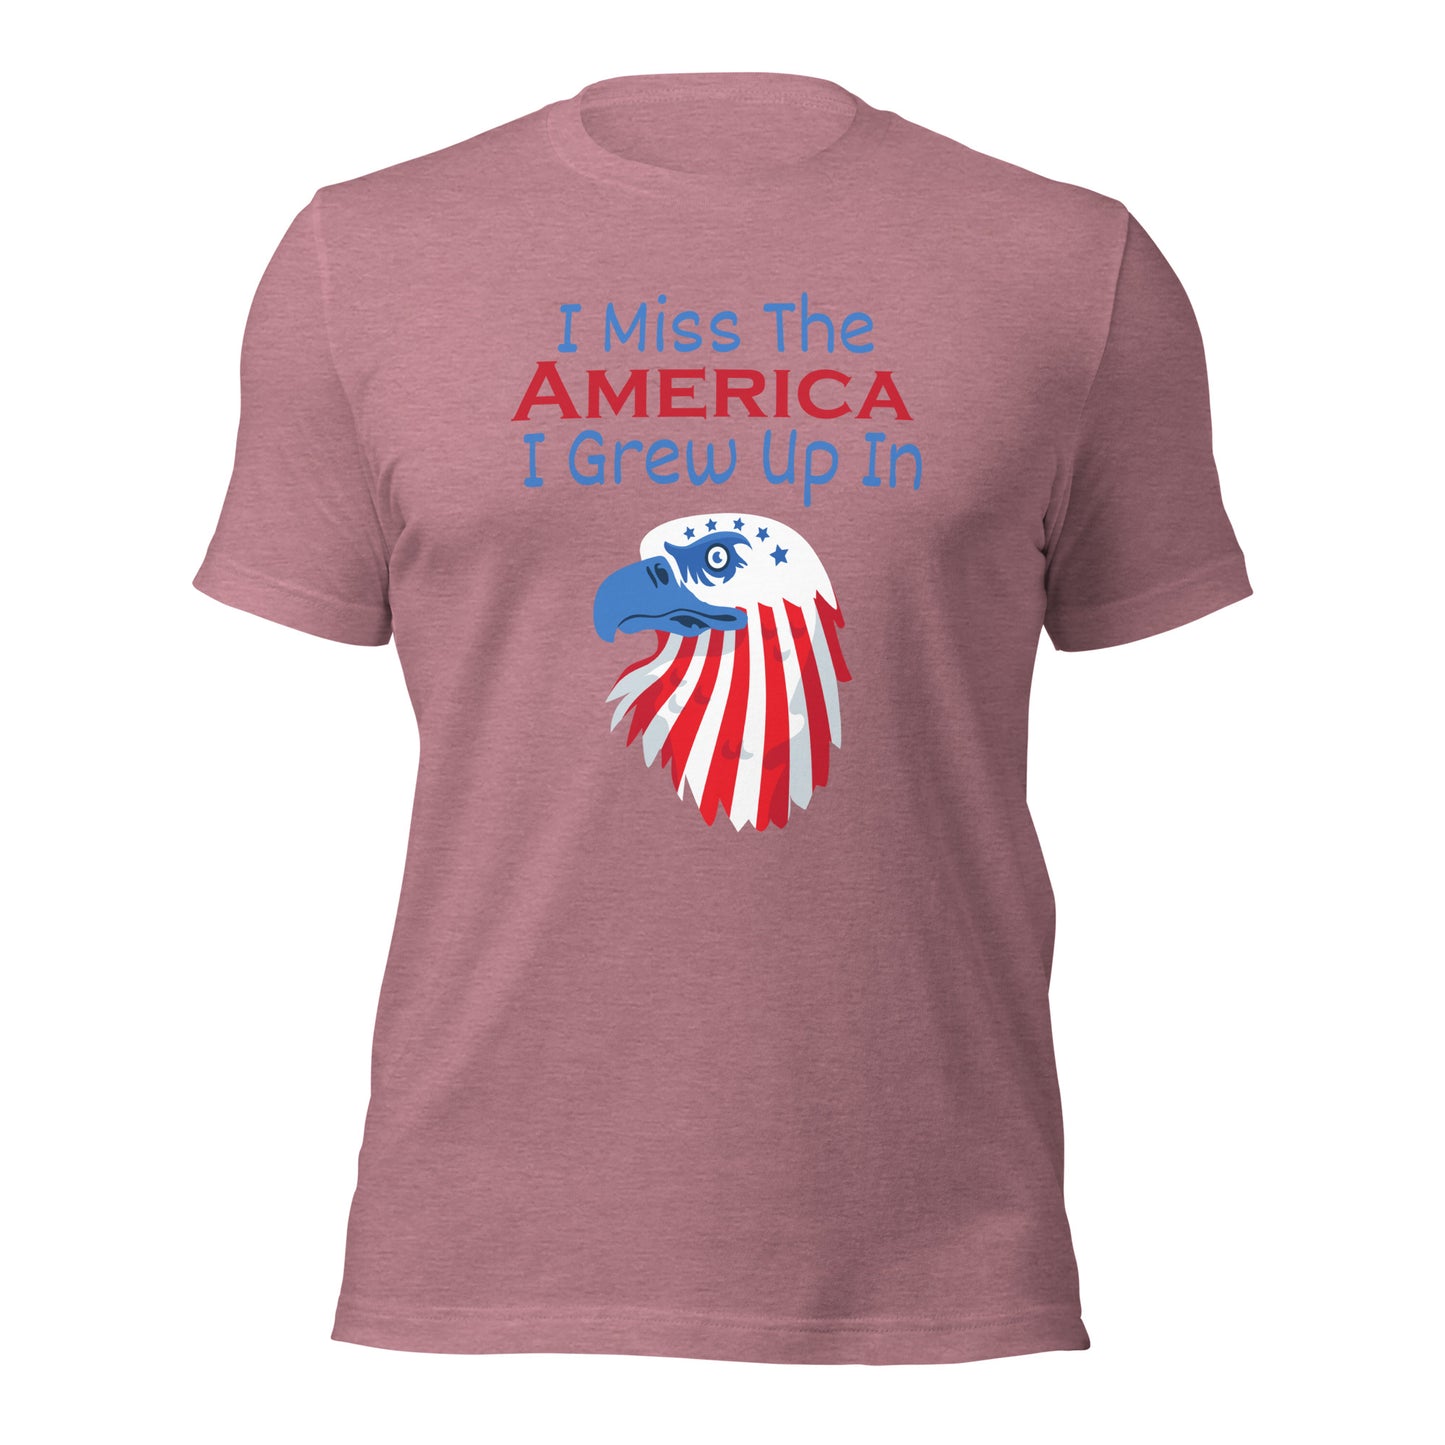 Soft and durable t-shirt with a message of nostalgia for America